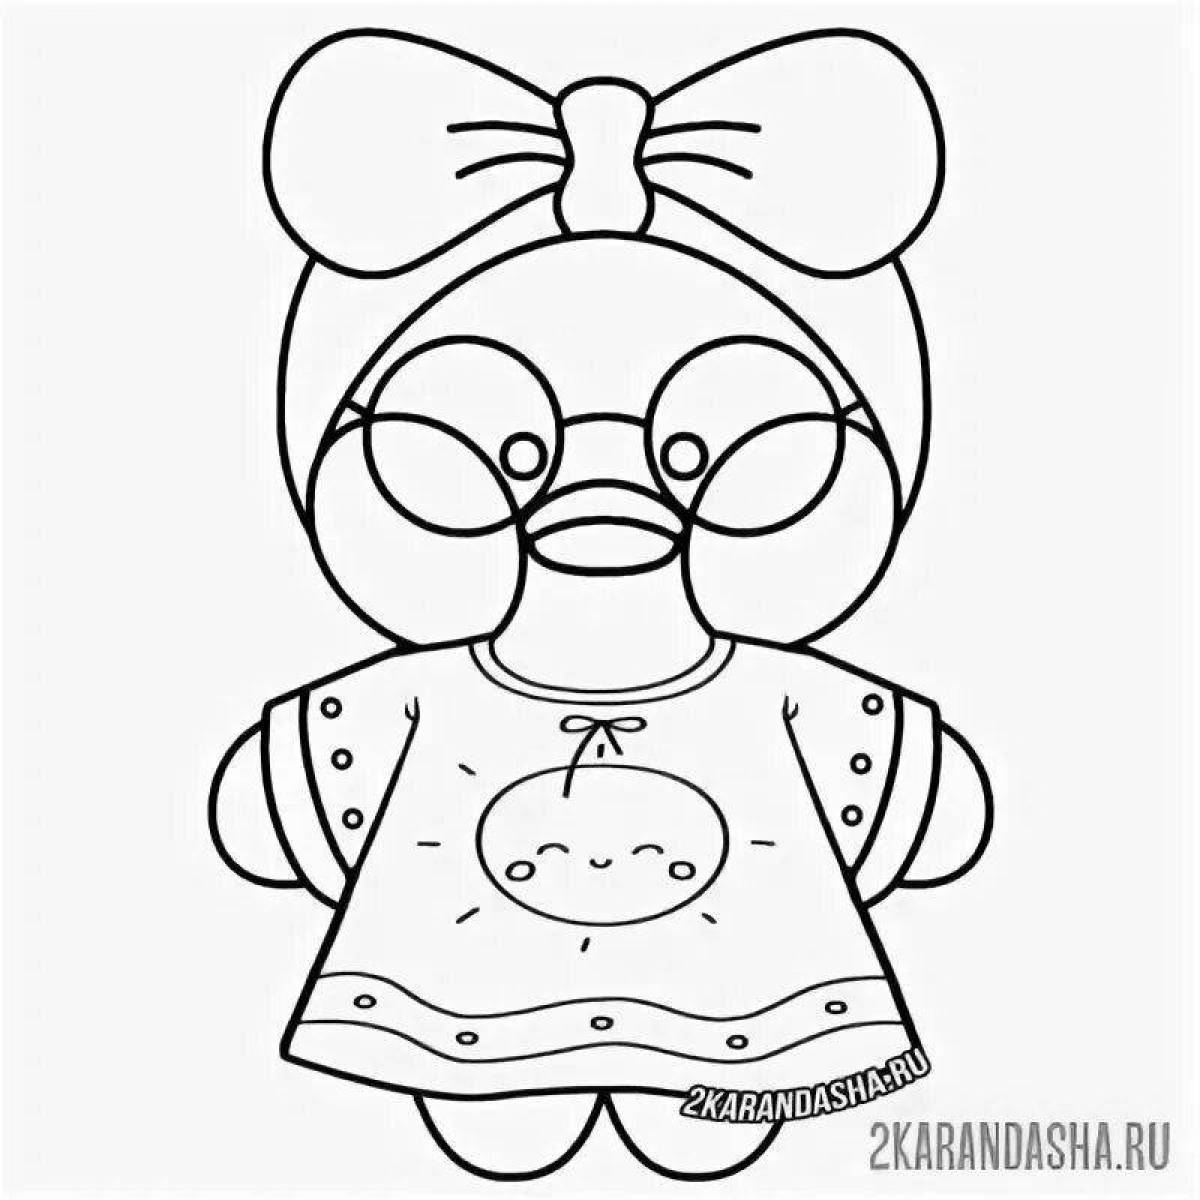 Lafanfan colorful duck coloring page